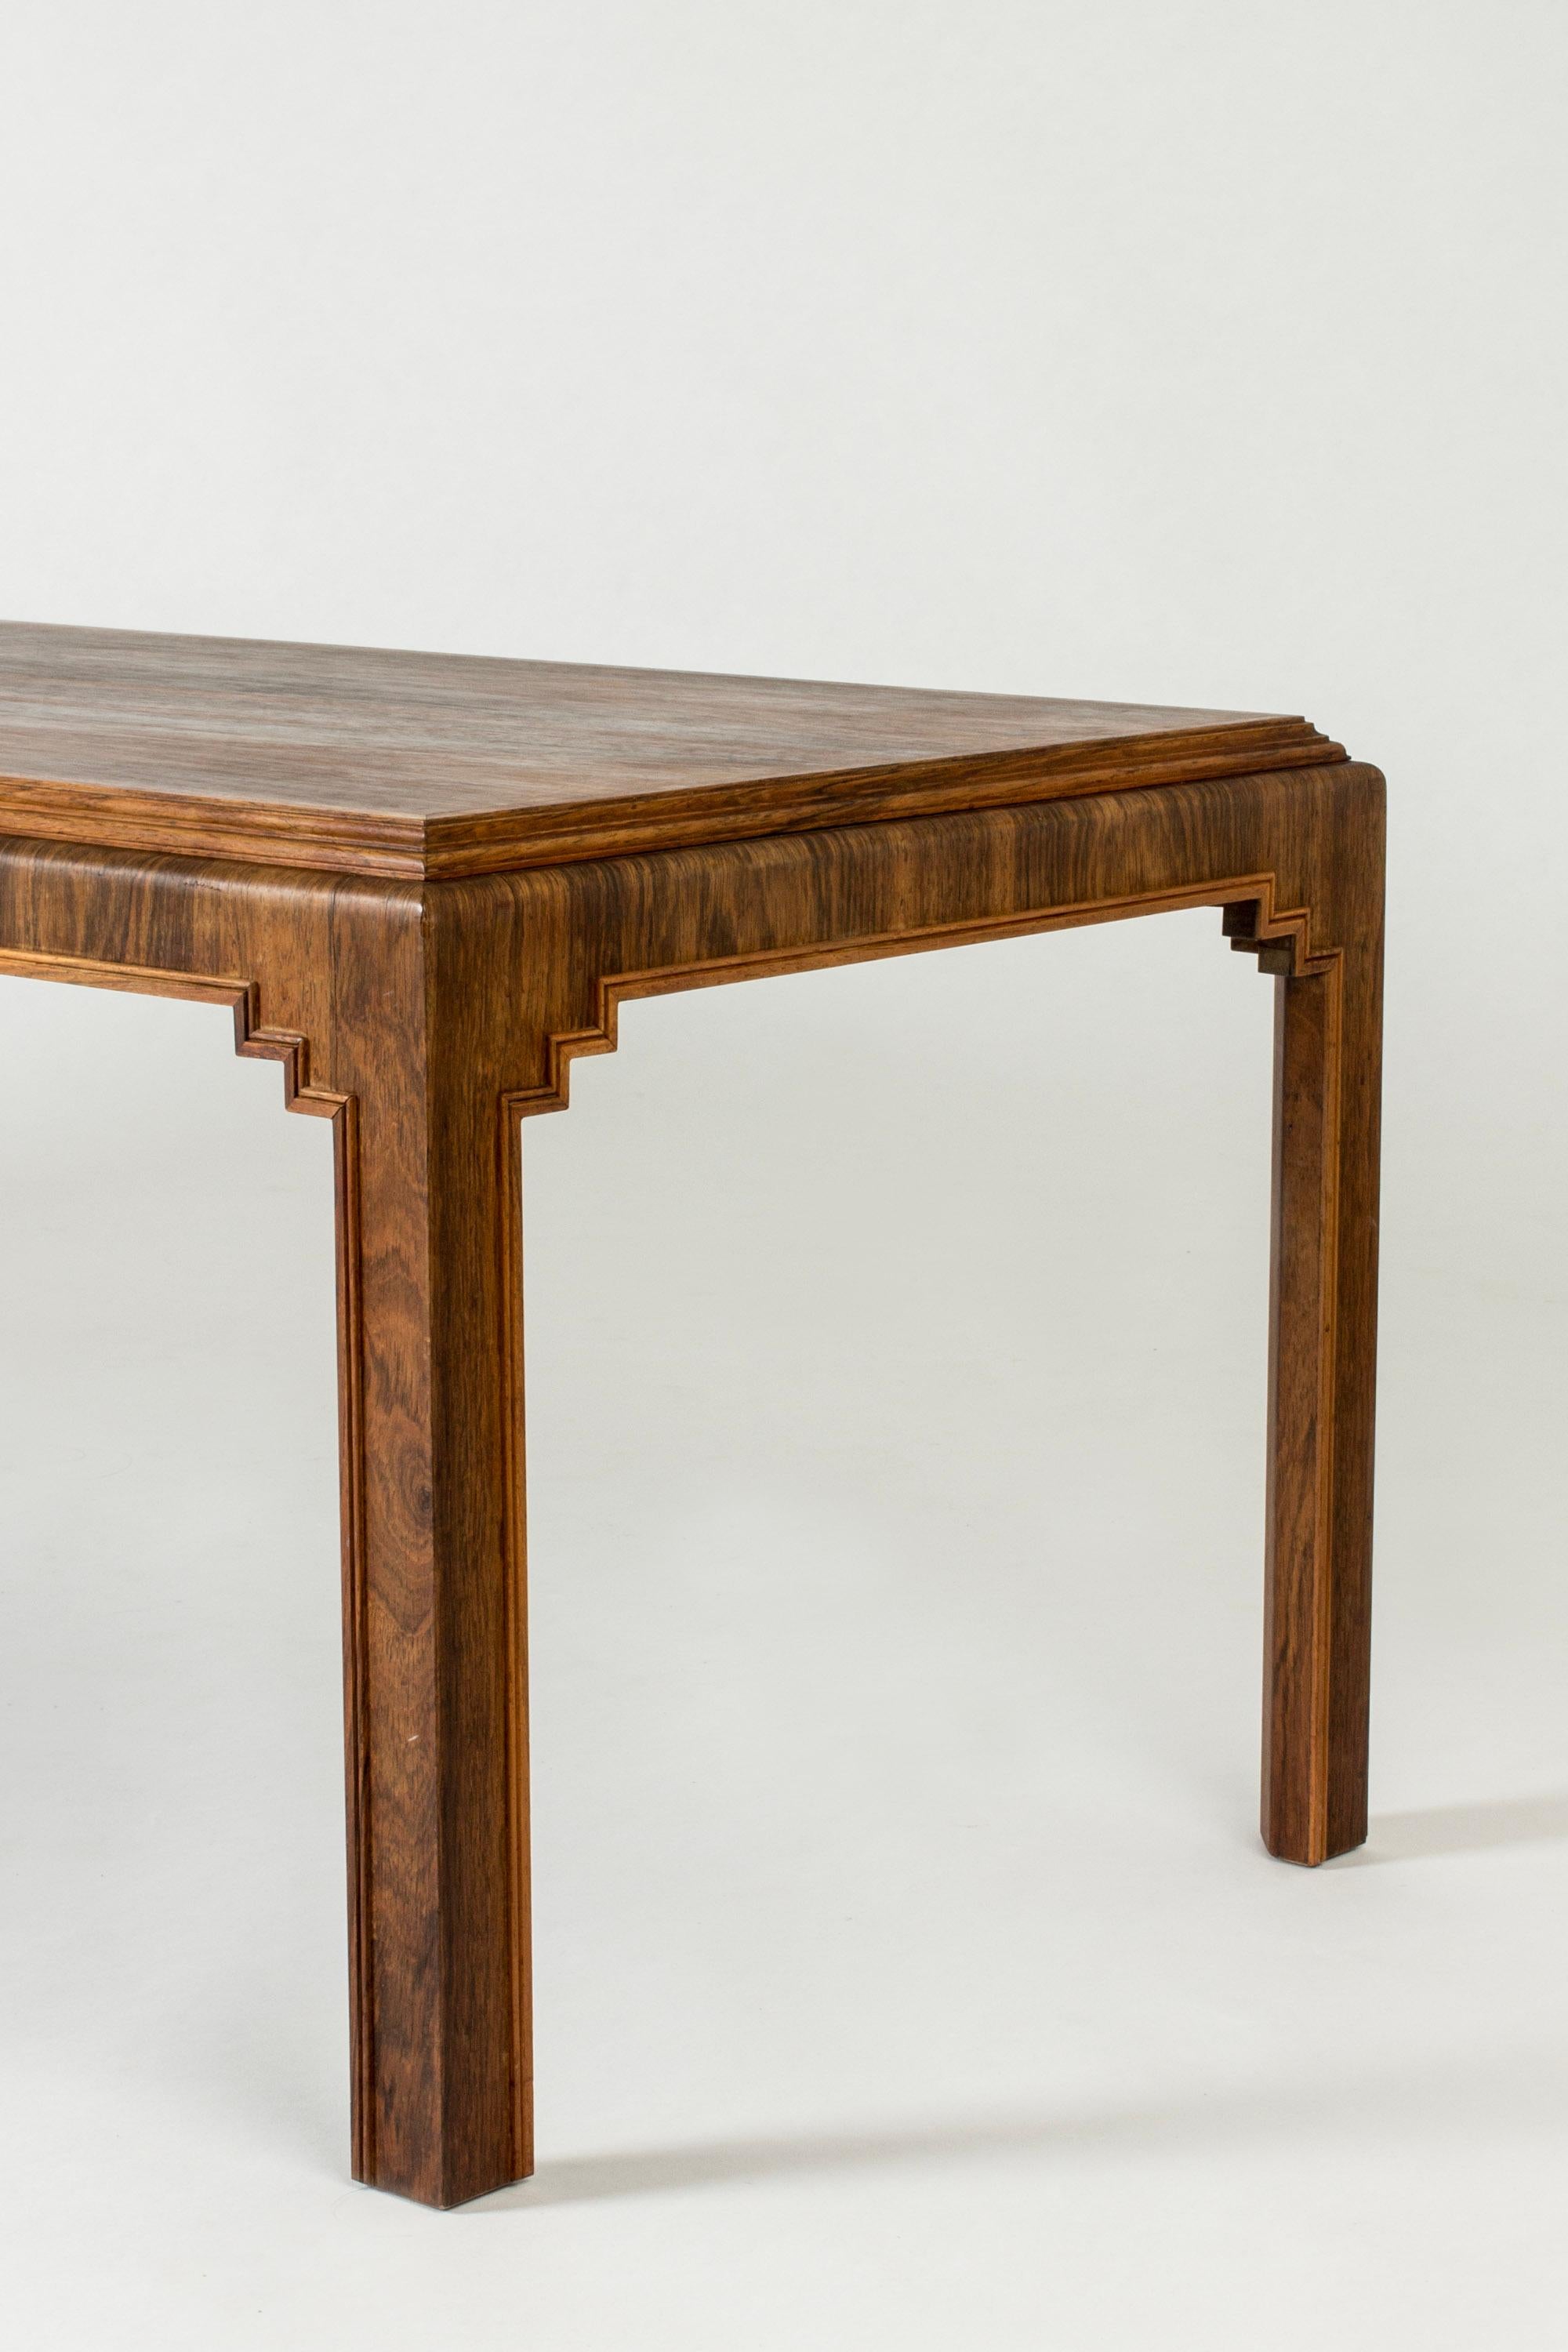 Mid-20th Century Scandinavian Modern rosewood coffee table, Sweden, 1930s For Sale